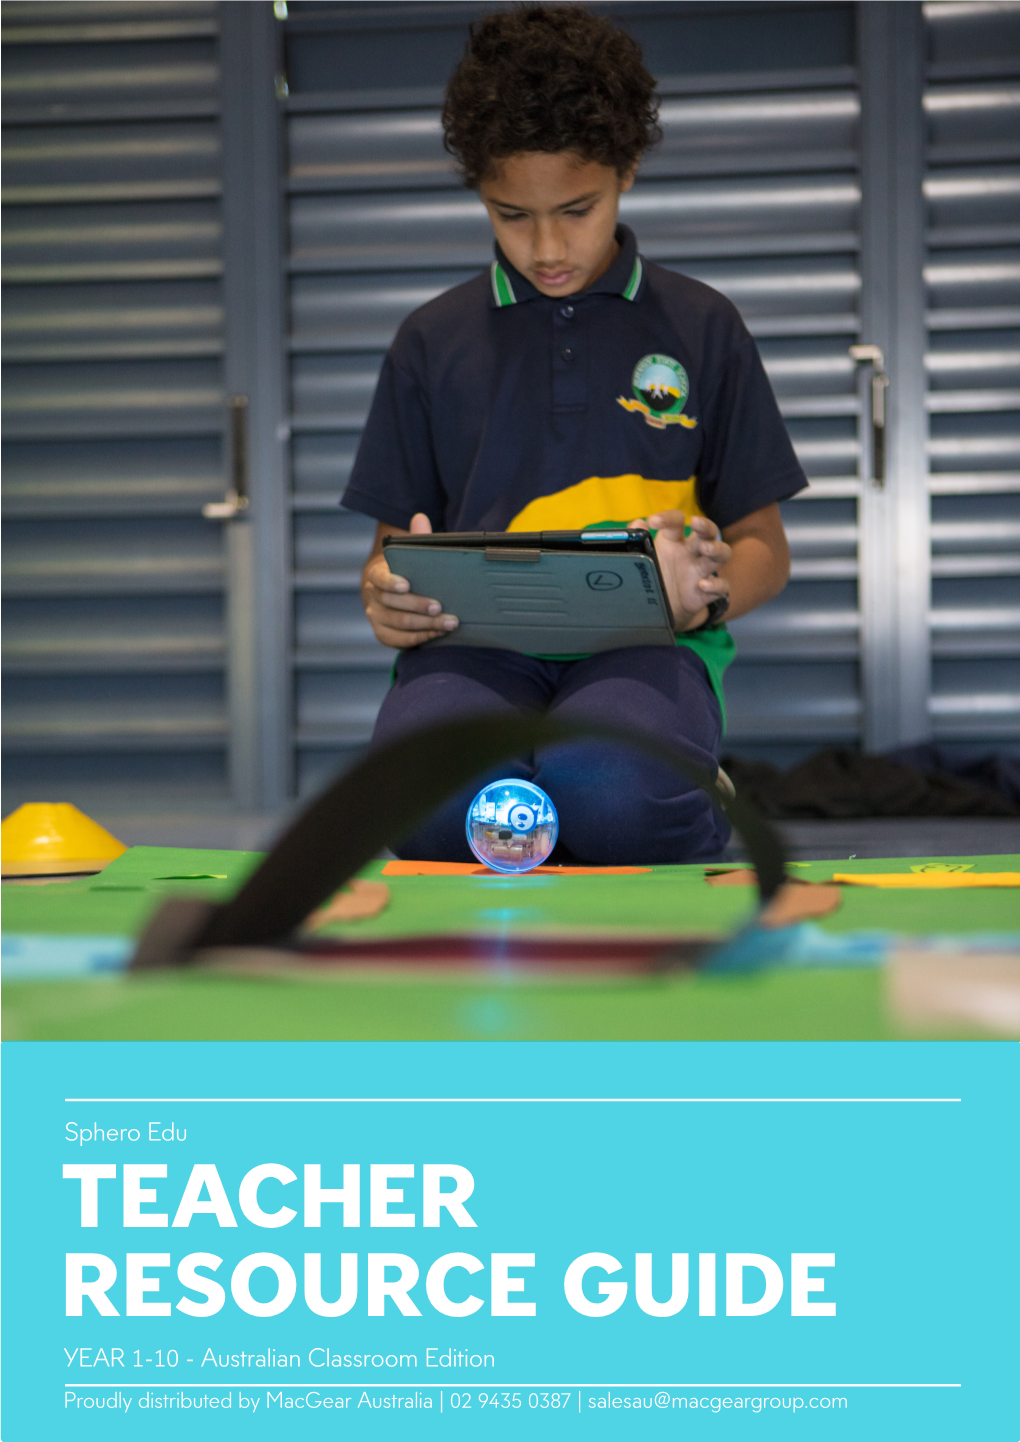 TEACHER RESOURCE GUIDE YEAR 1-10 - Australian Classroom Edition Proudly Distributed by Macgear Australia | 02 9435 0387 | Salesau@Macgeargroup.Com Table of Contents